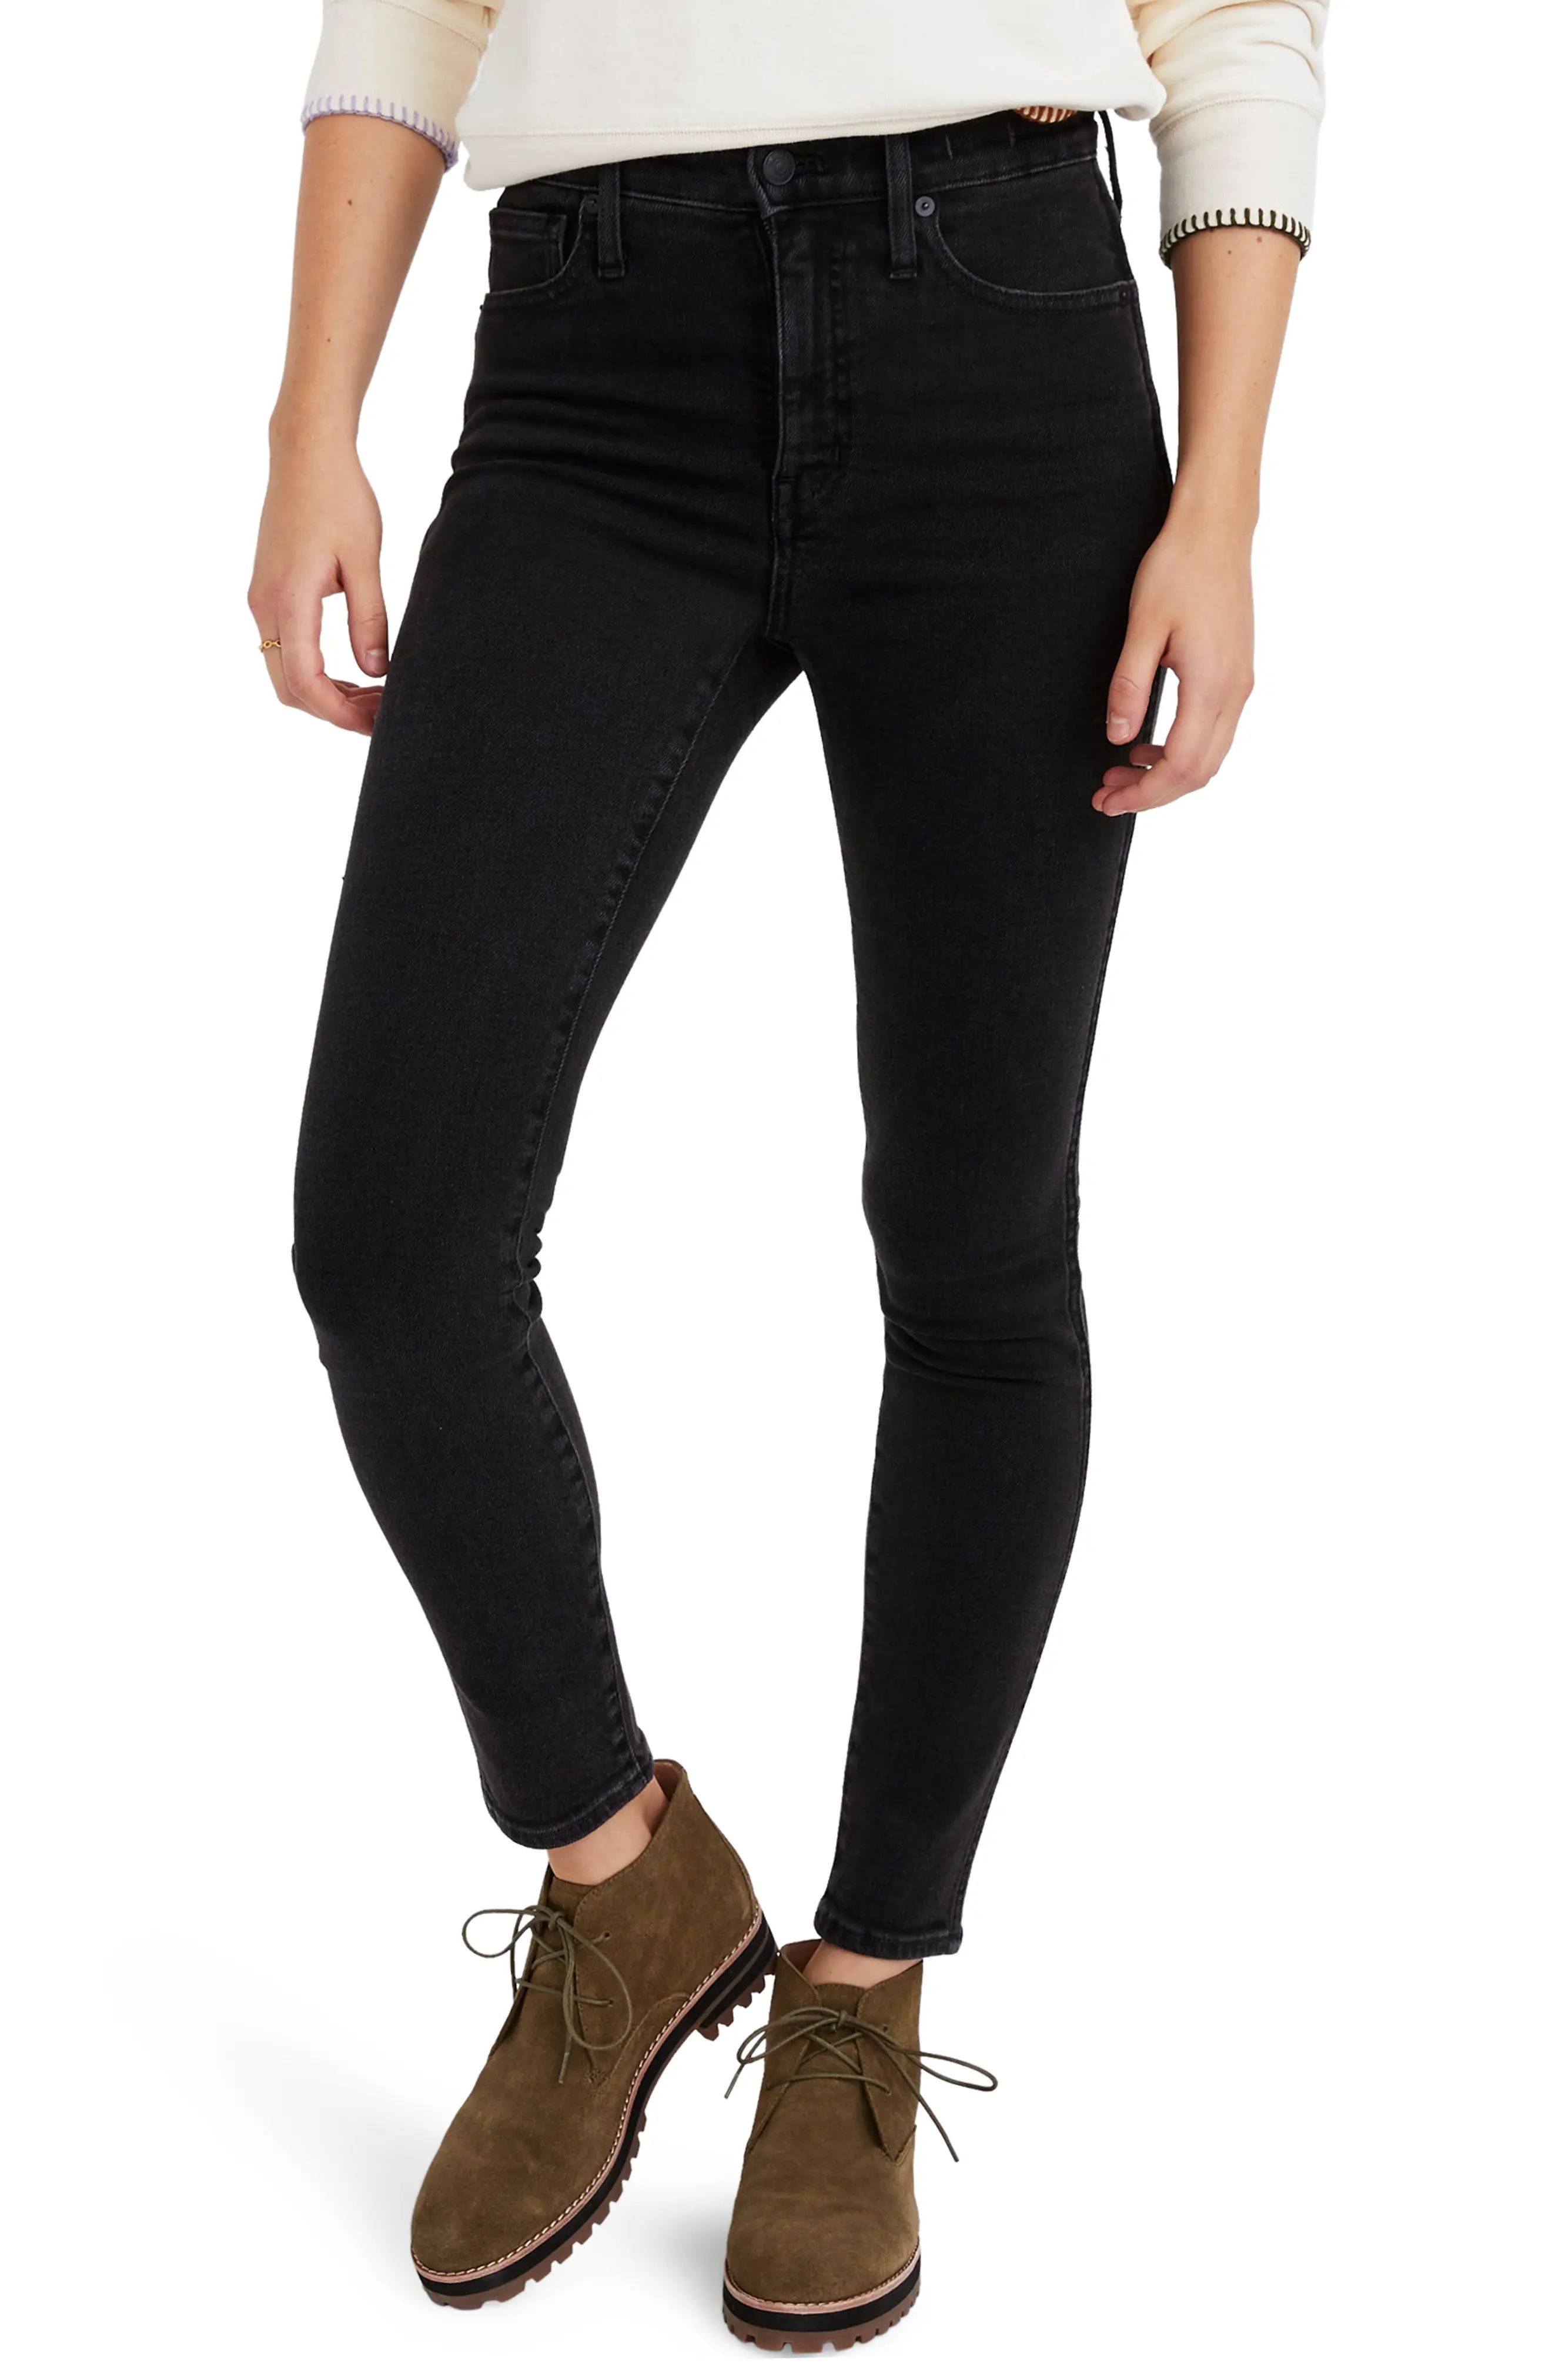 Women's Madewell 10-Inch High Waist Ankle Skinny Jeans, Size 30 - Black | Nordstrom